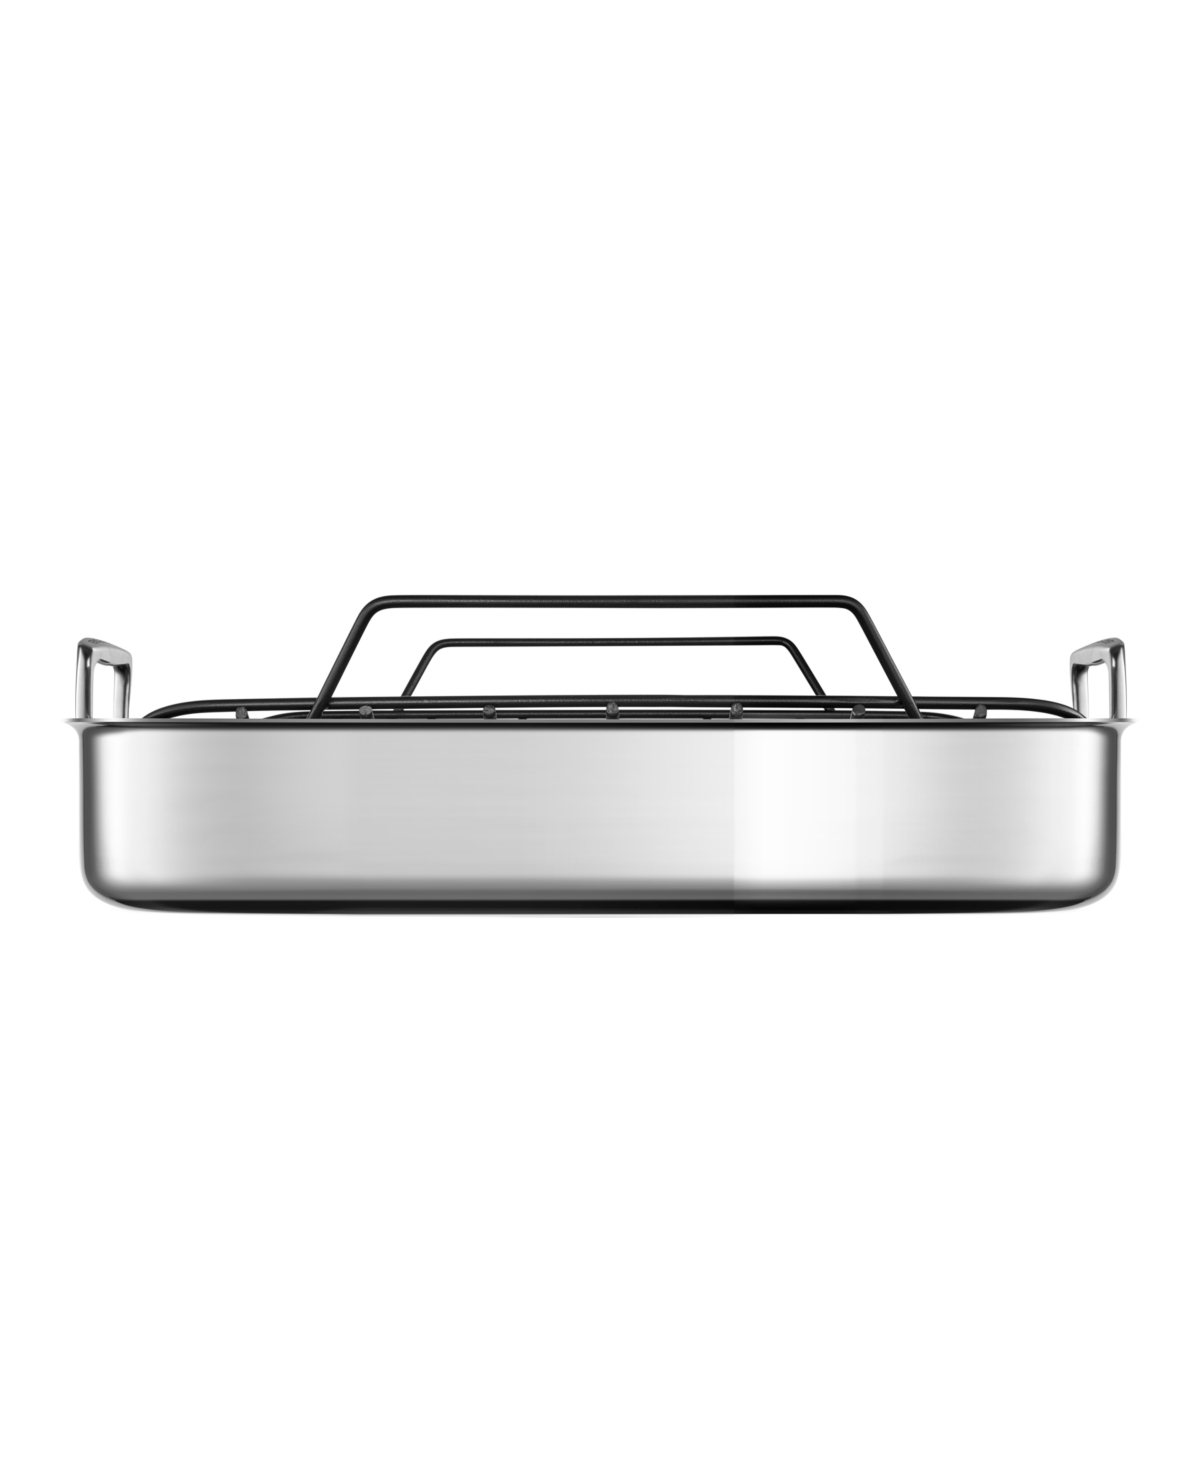 Le Creuset Stainless Steel Roasting Pan And Nonstick Cooking Rack In N,a